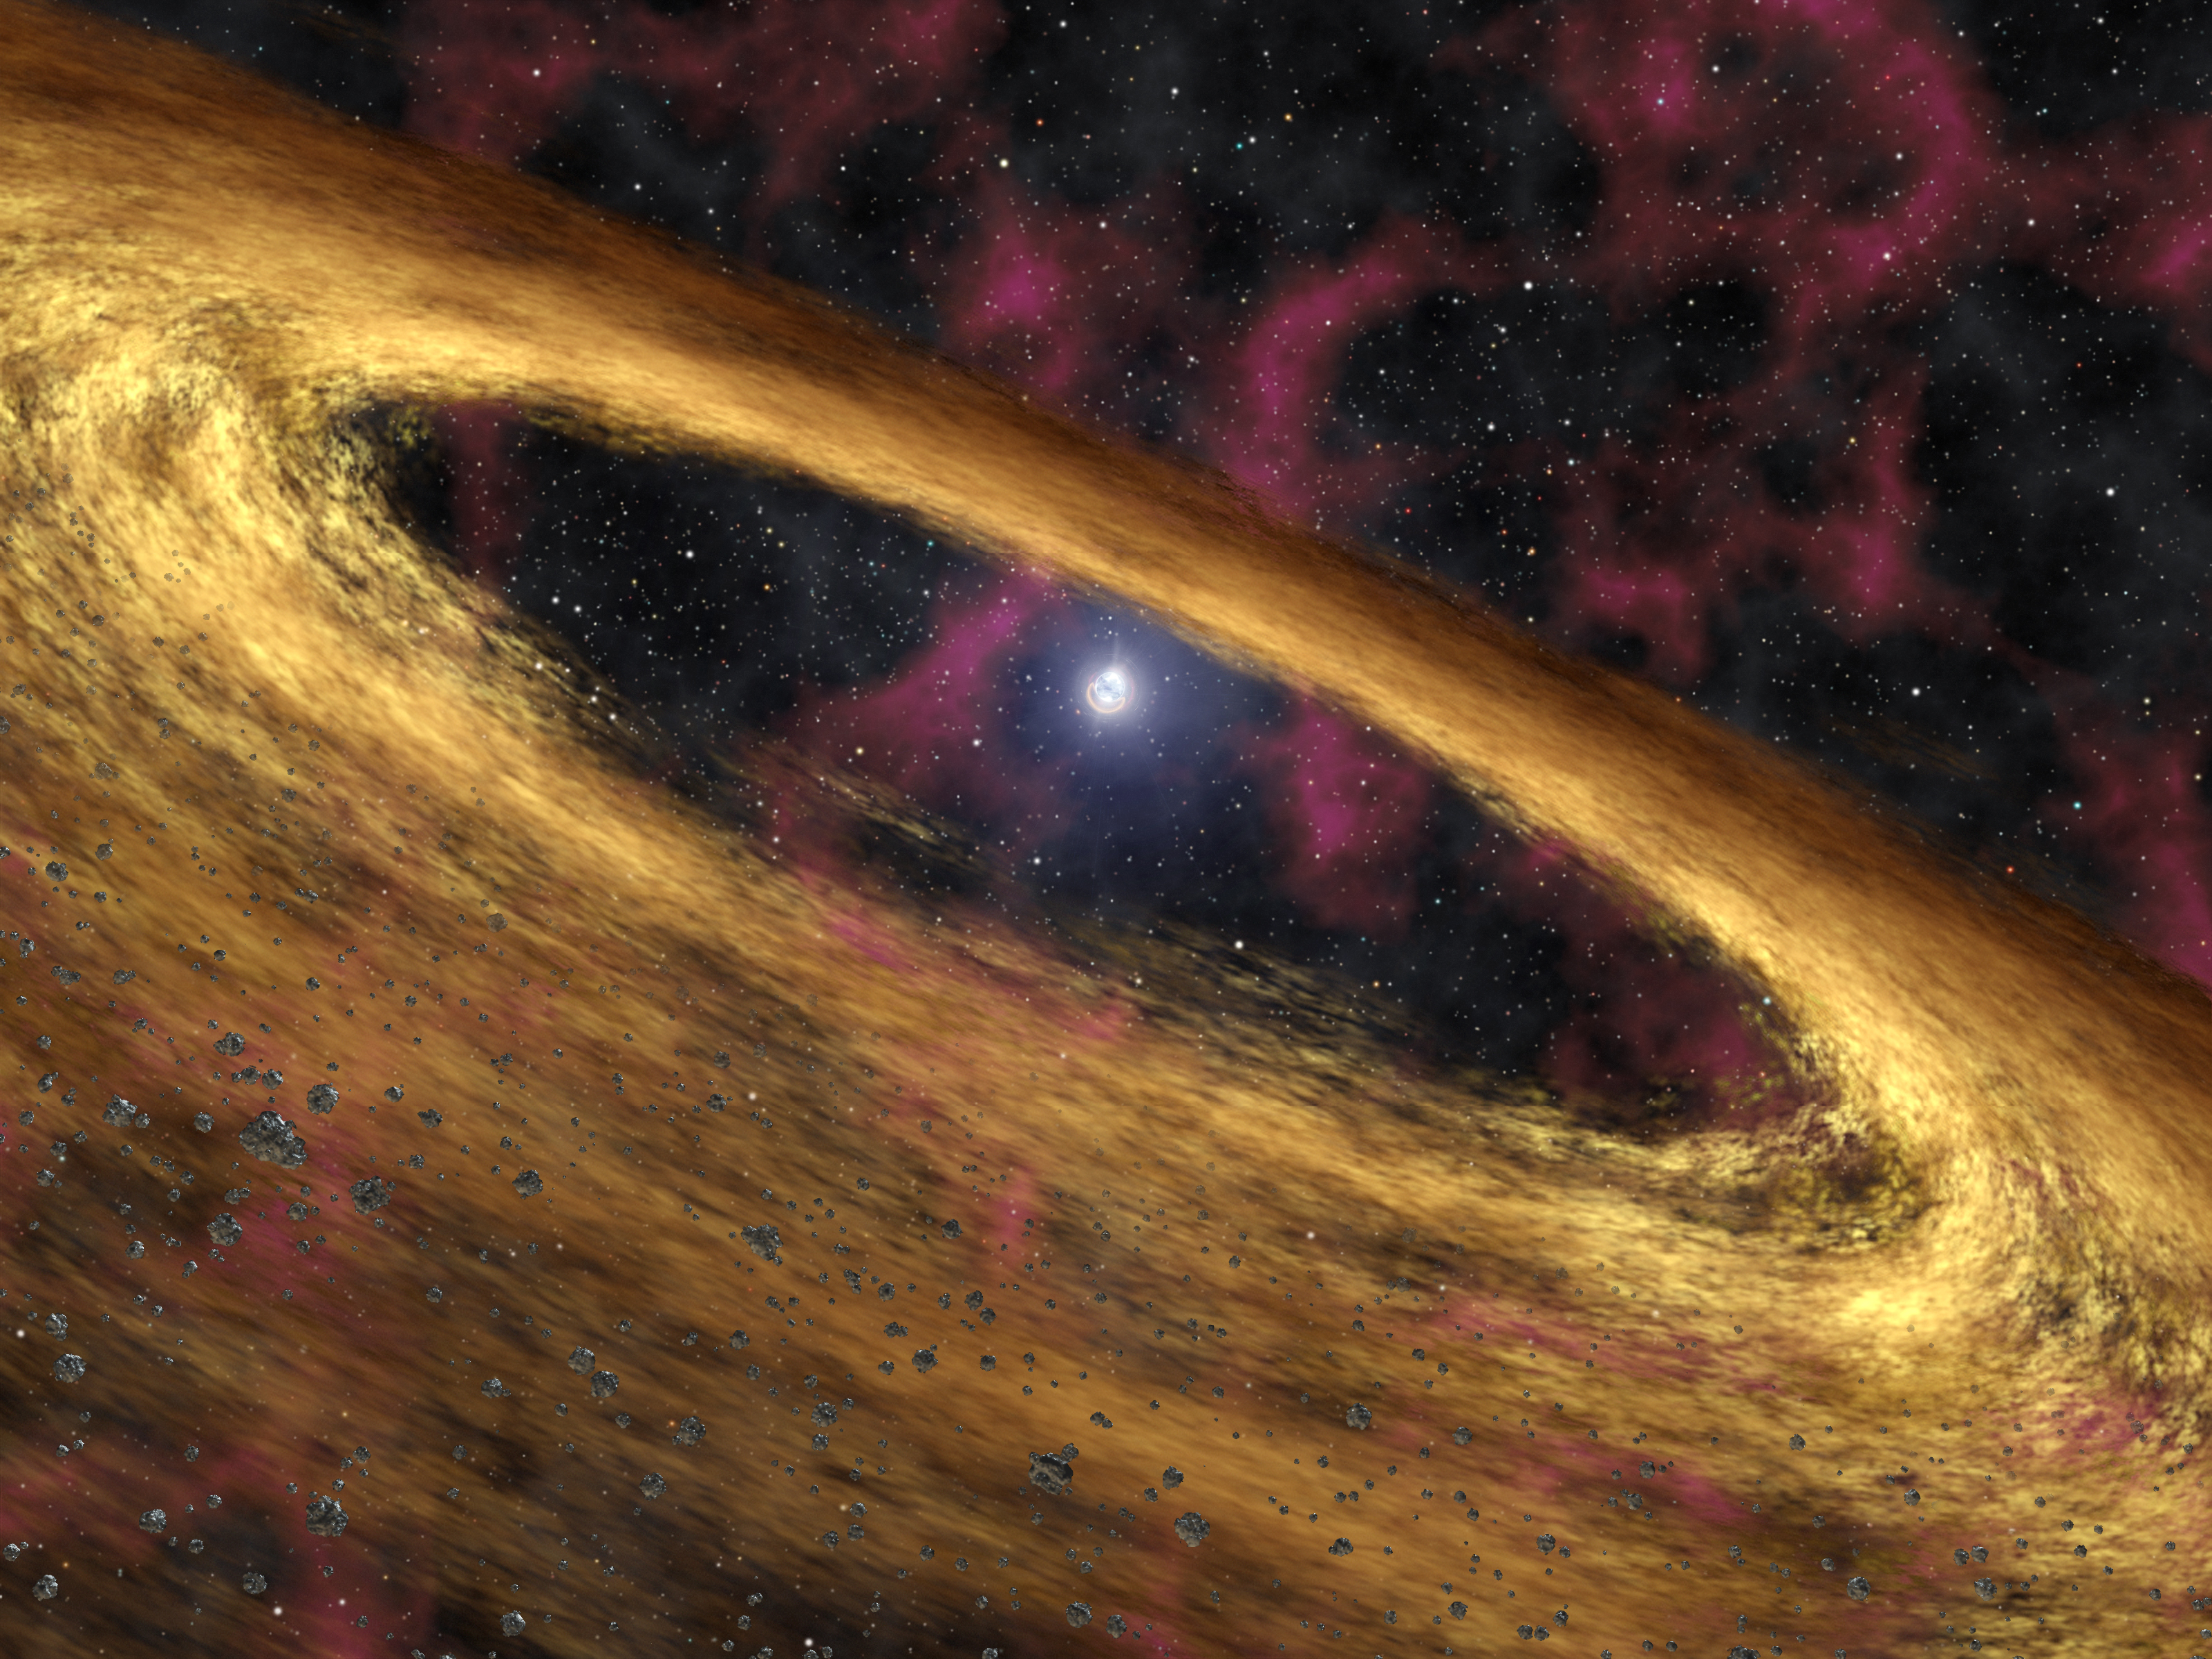 Artist’s concept of a pulsar and surrounding disk of rubble called a “fallback” disk, out of which new planets could form.